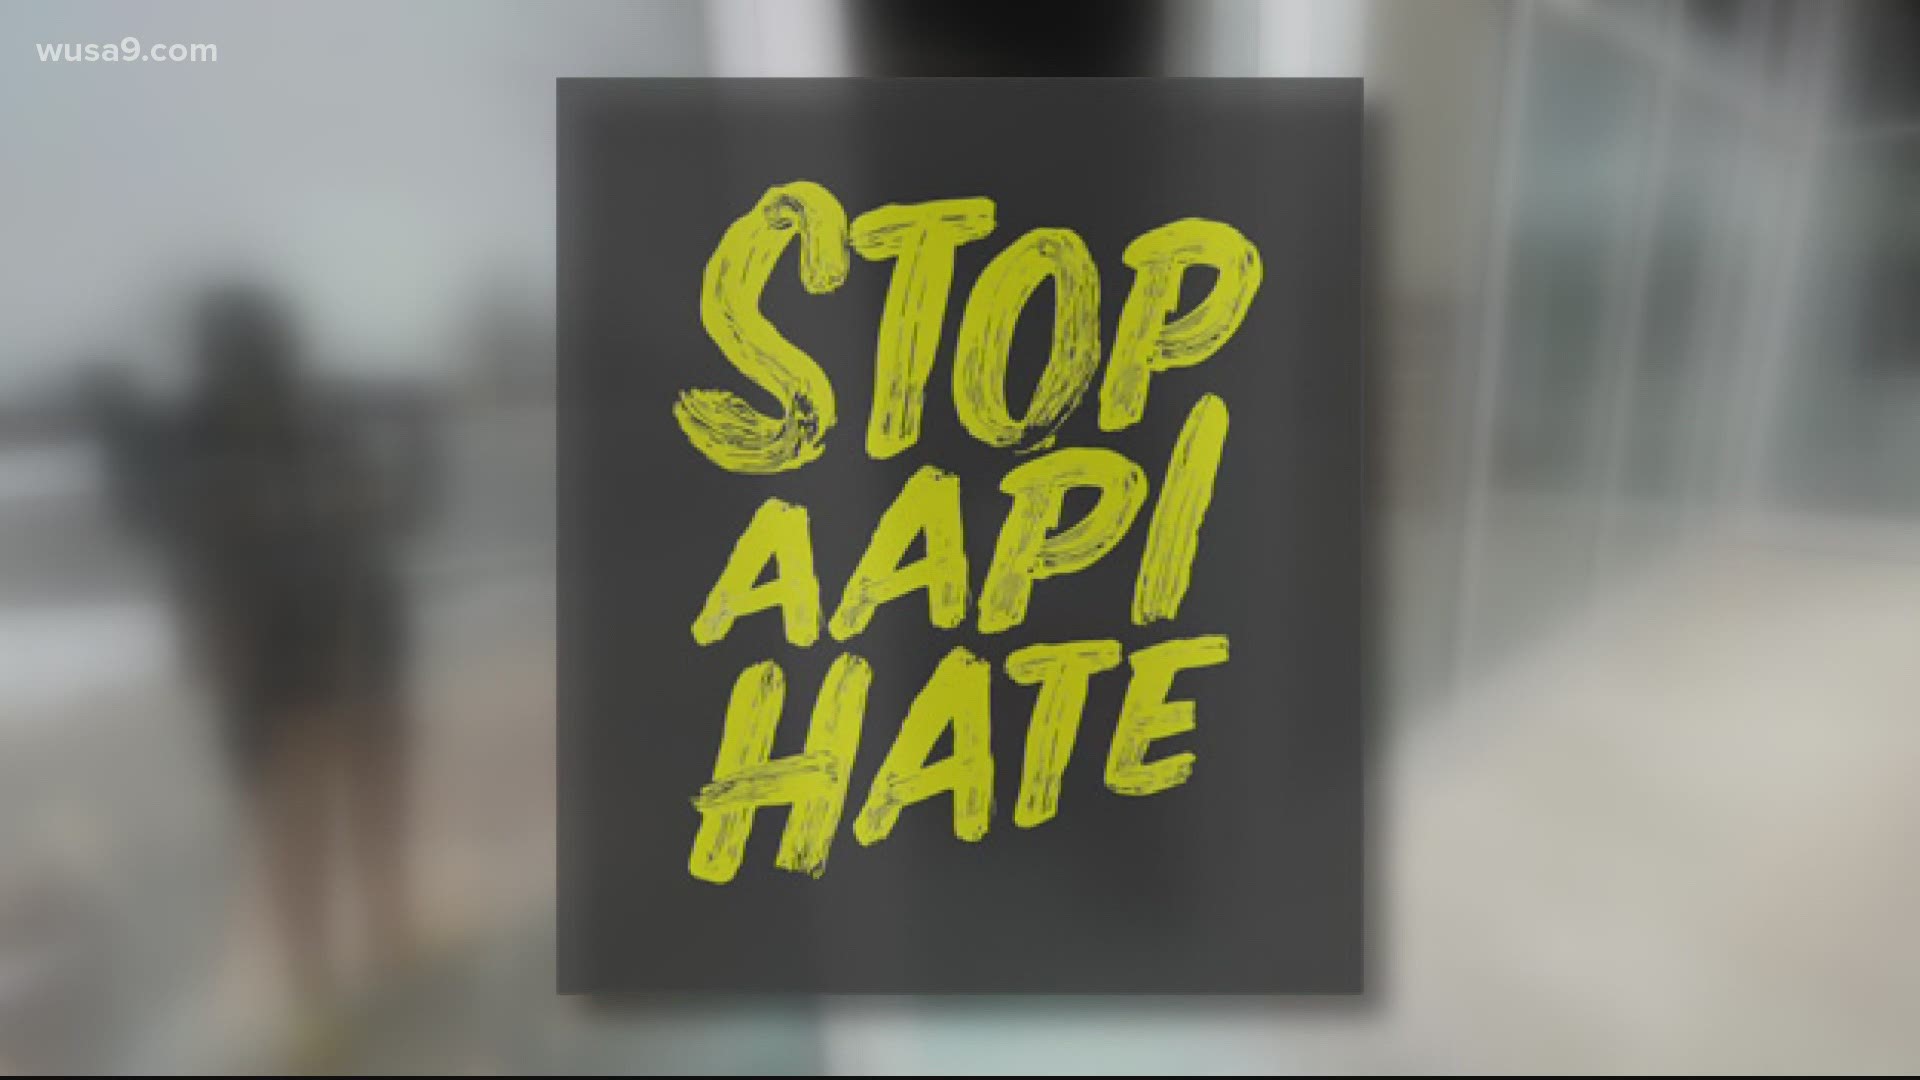 A group of chefs have banded together to raise awareness and raise money for Stop AAPI Hate.